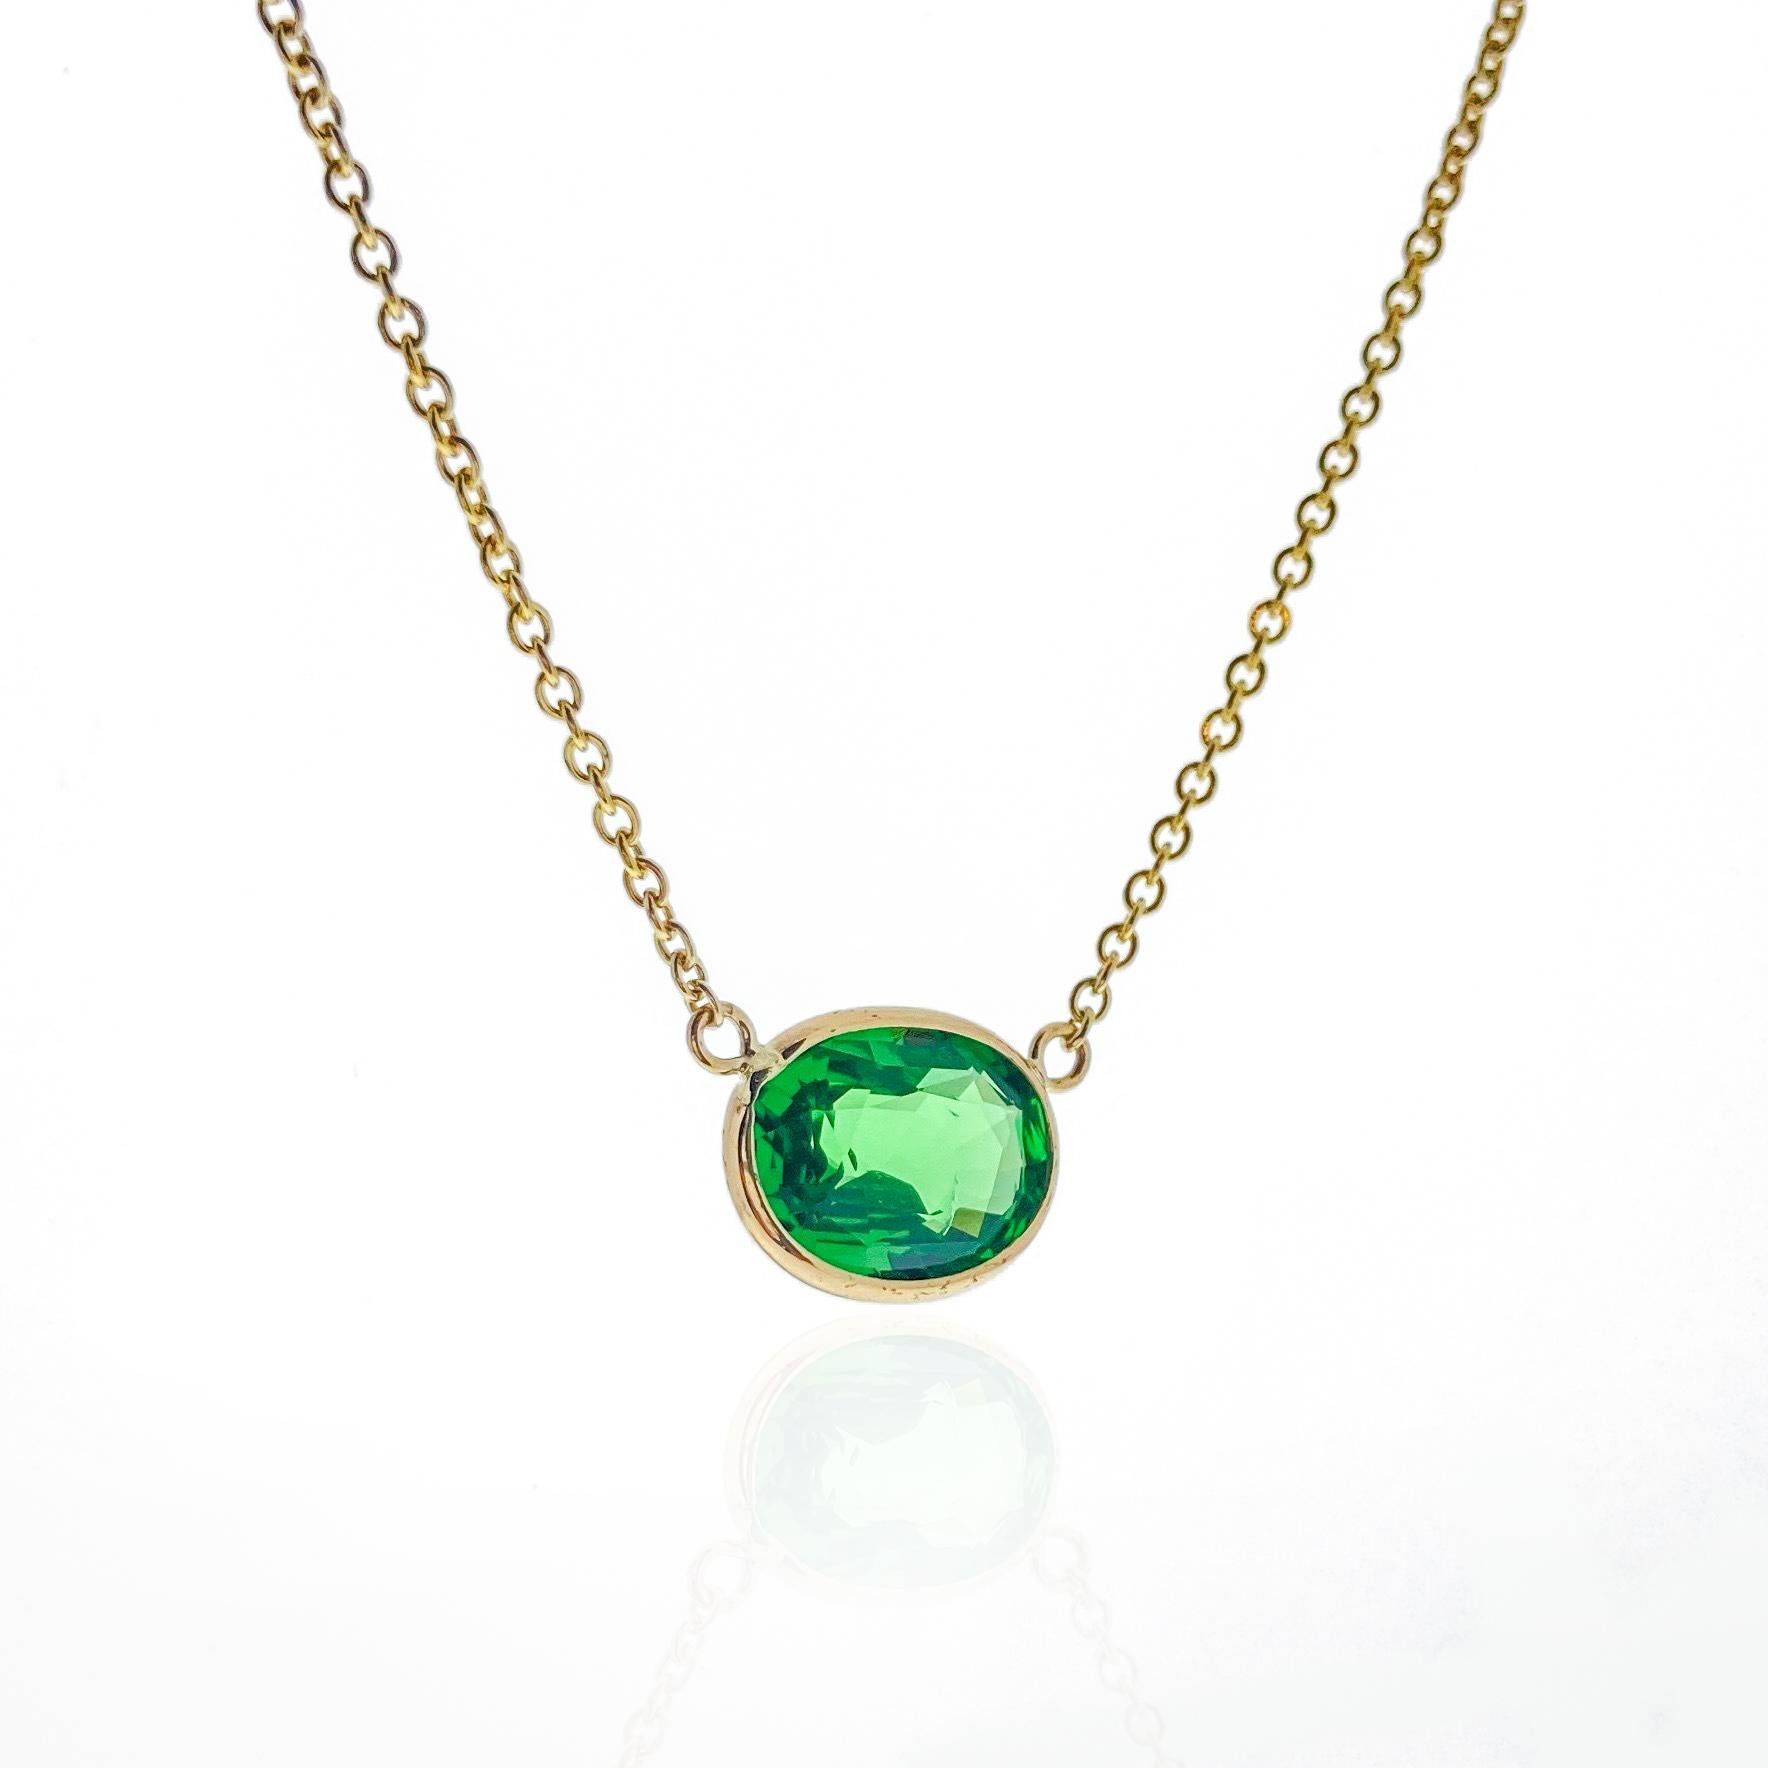 Contemporary 2.02 Carat Green Tsavorite Oval Cut Fashion Necklaces In 14K Yellow Gold  For Sale